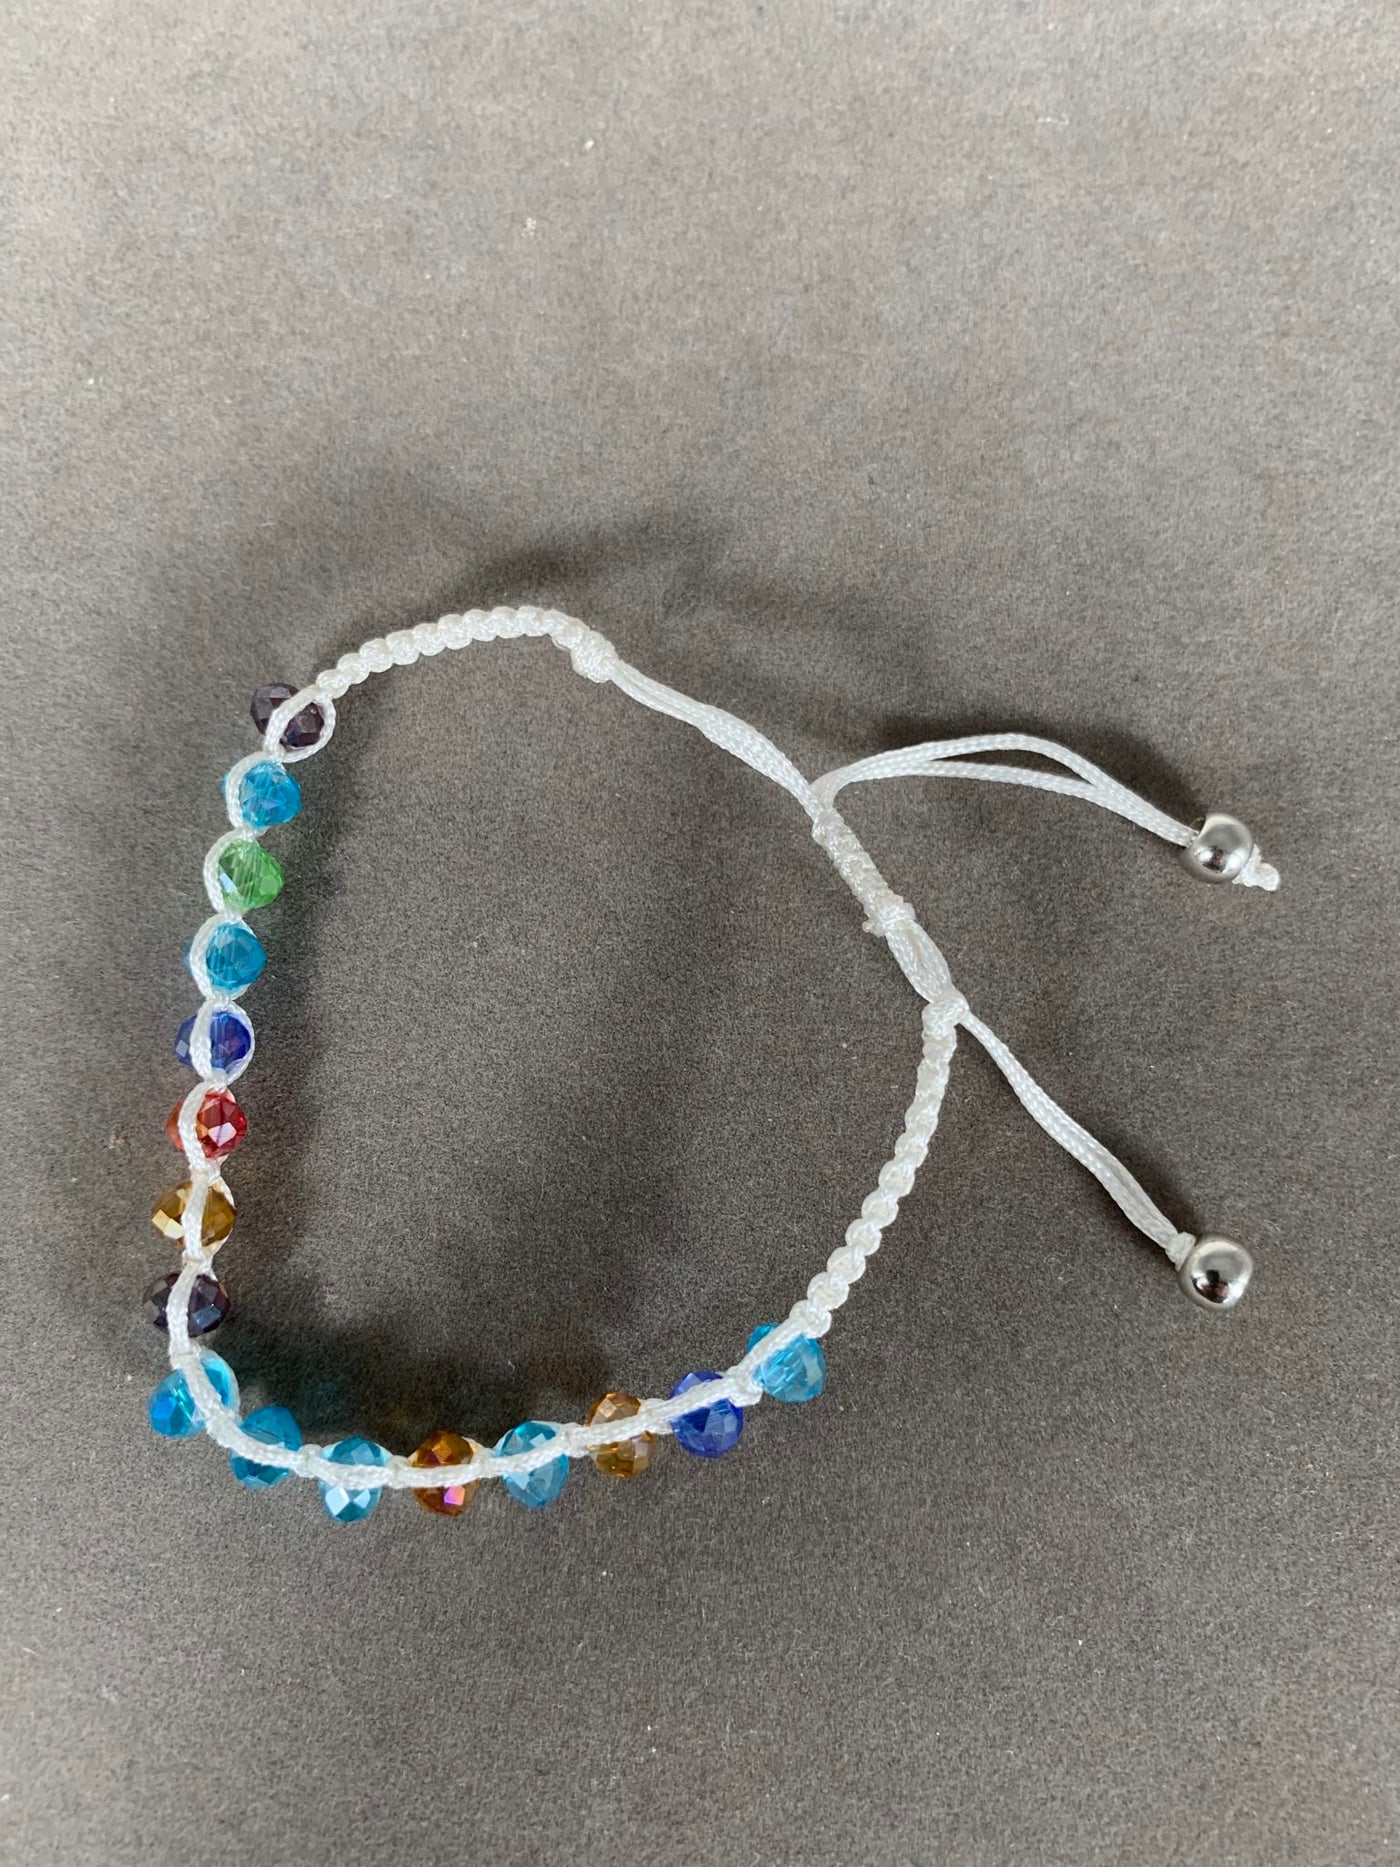 White Braided Bracelet Featuring Crystal Beads